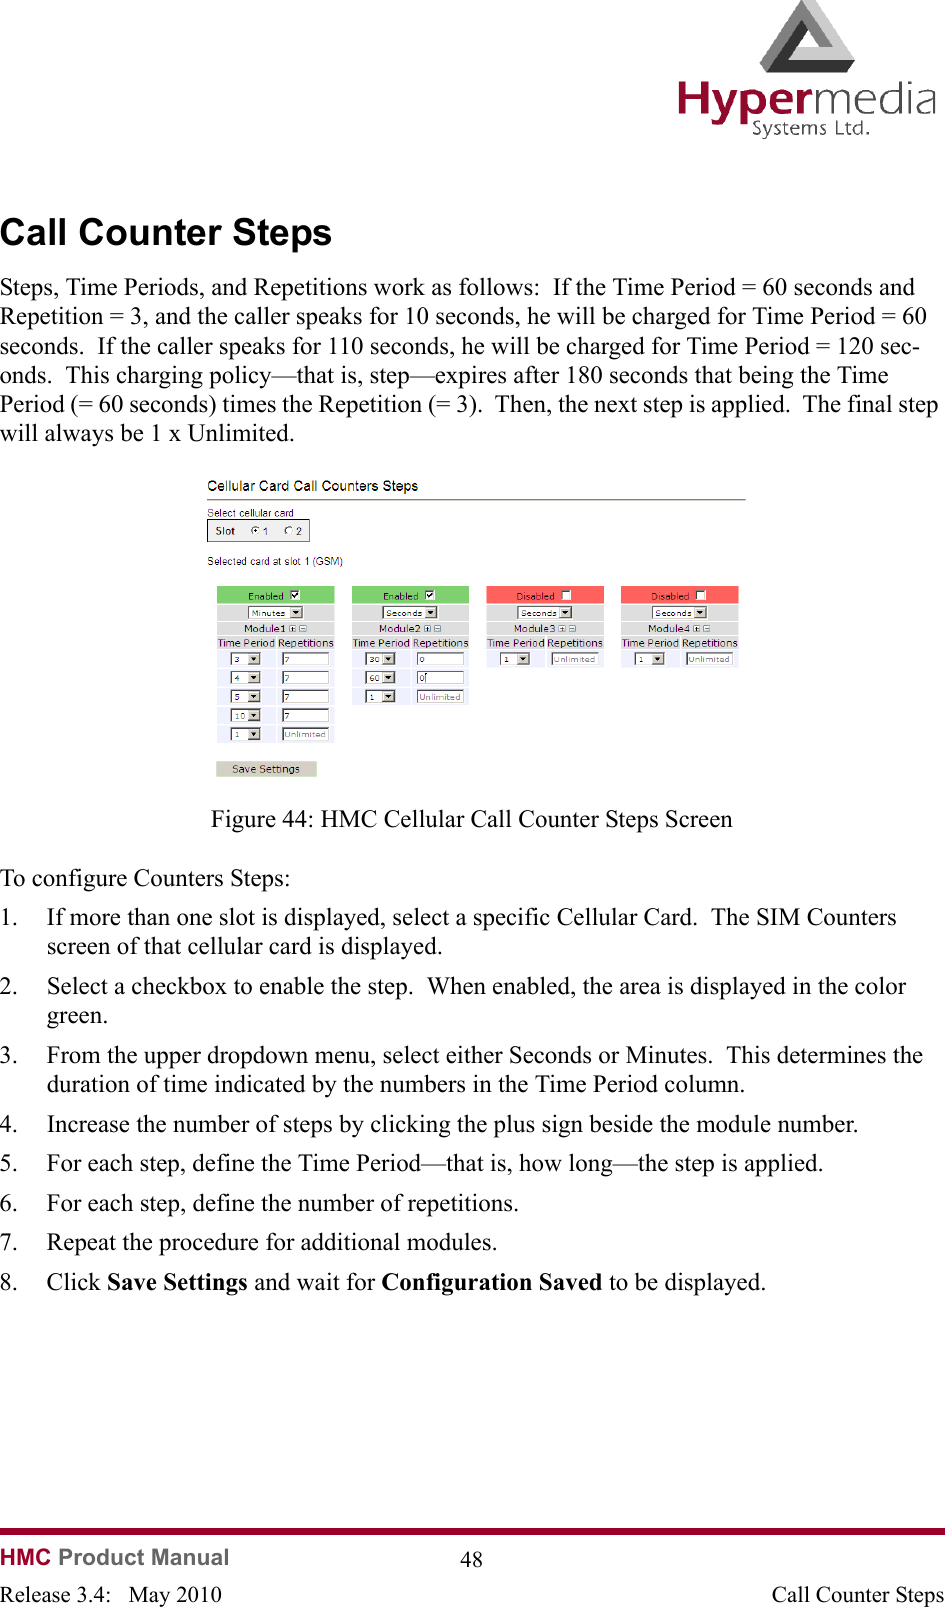   HMC Product Manual  48Release 3.4:   May 2010 Call Counter StepsCall Counter StepsSteps, Time Periods, and Repetitions work as follows:  If the Time Period = 60 seconds and Repetition = 3, and the caller speaks for 10 seconds, he will be charged for Time Period = 60 seconds.  If the caller speaks for 110 seconds, he will be charged for Time Period = 120 sec-onds.  This charging policy—that is, step—expires after 180 seconds that being the Time Period (= 60 seconds) times the Repetition (= 3).  Then, the next step is applied.  The final step will always be 1 x Unlimited.              Figure 44: HMC Cellular Call Counter Steps ScreenTo configure Counters Steps:1. If more than one slot is displayed, select a specific Cellular Card.  The SIM Counters screen of that cellular card is displayed.2. Select a checkbox to enable the step.  When enabled, the area is displayed in the color green.3. From the upper dropdown menu, select either Seconds or Minutes.  This determines the duration of time indicated by the numbers in the Time Period column.4. Increase the number of steps by clicking the plus sign beside the module number.5. For each step, define the Time Period—that is, how long—the step is applied.6. For each step, define the number of repetitions. 7. Repeat the procedure for additional modules.8. Click Save Settings and wait for Configuration Saved to be displayed.  